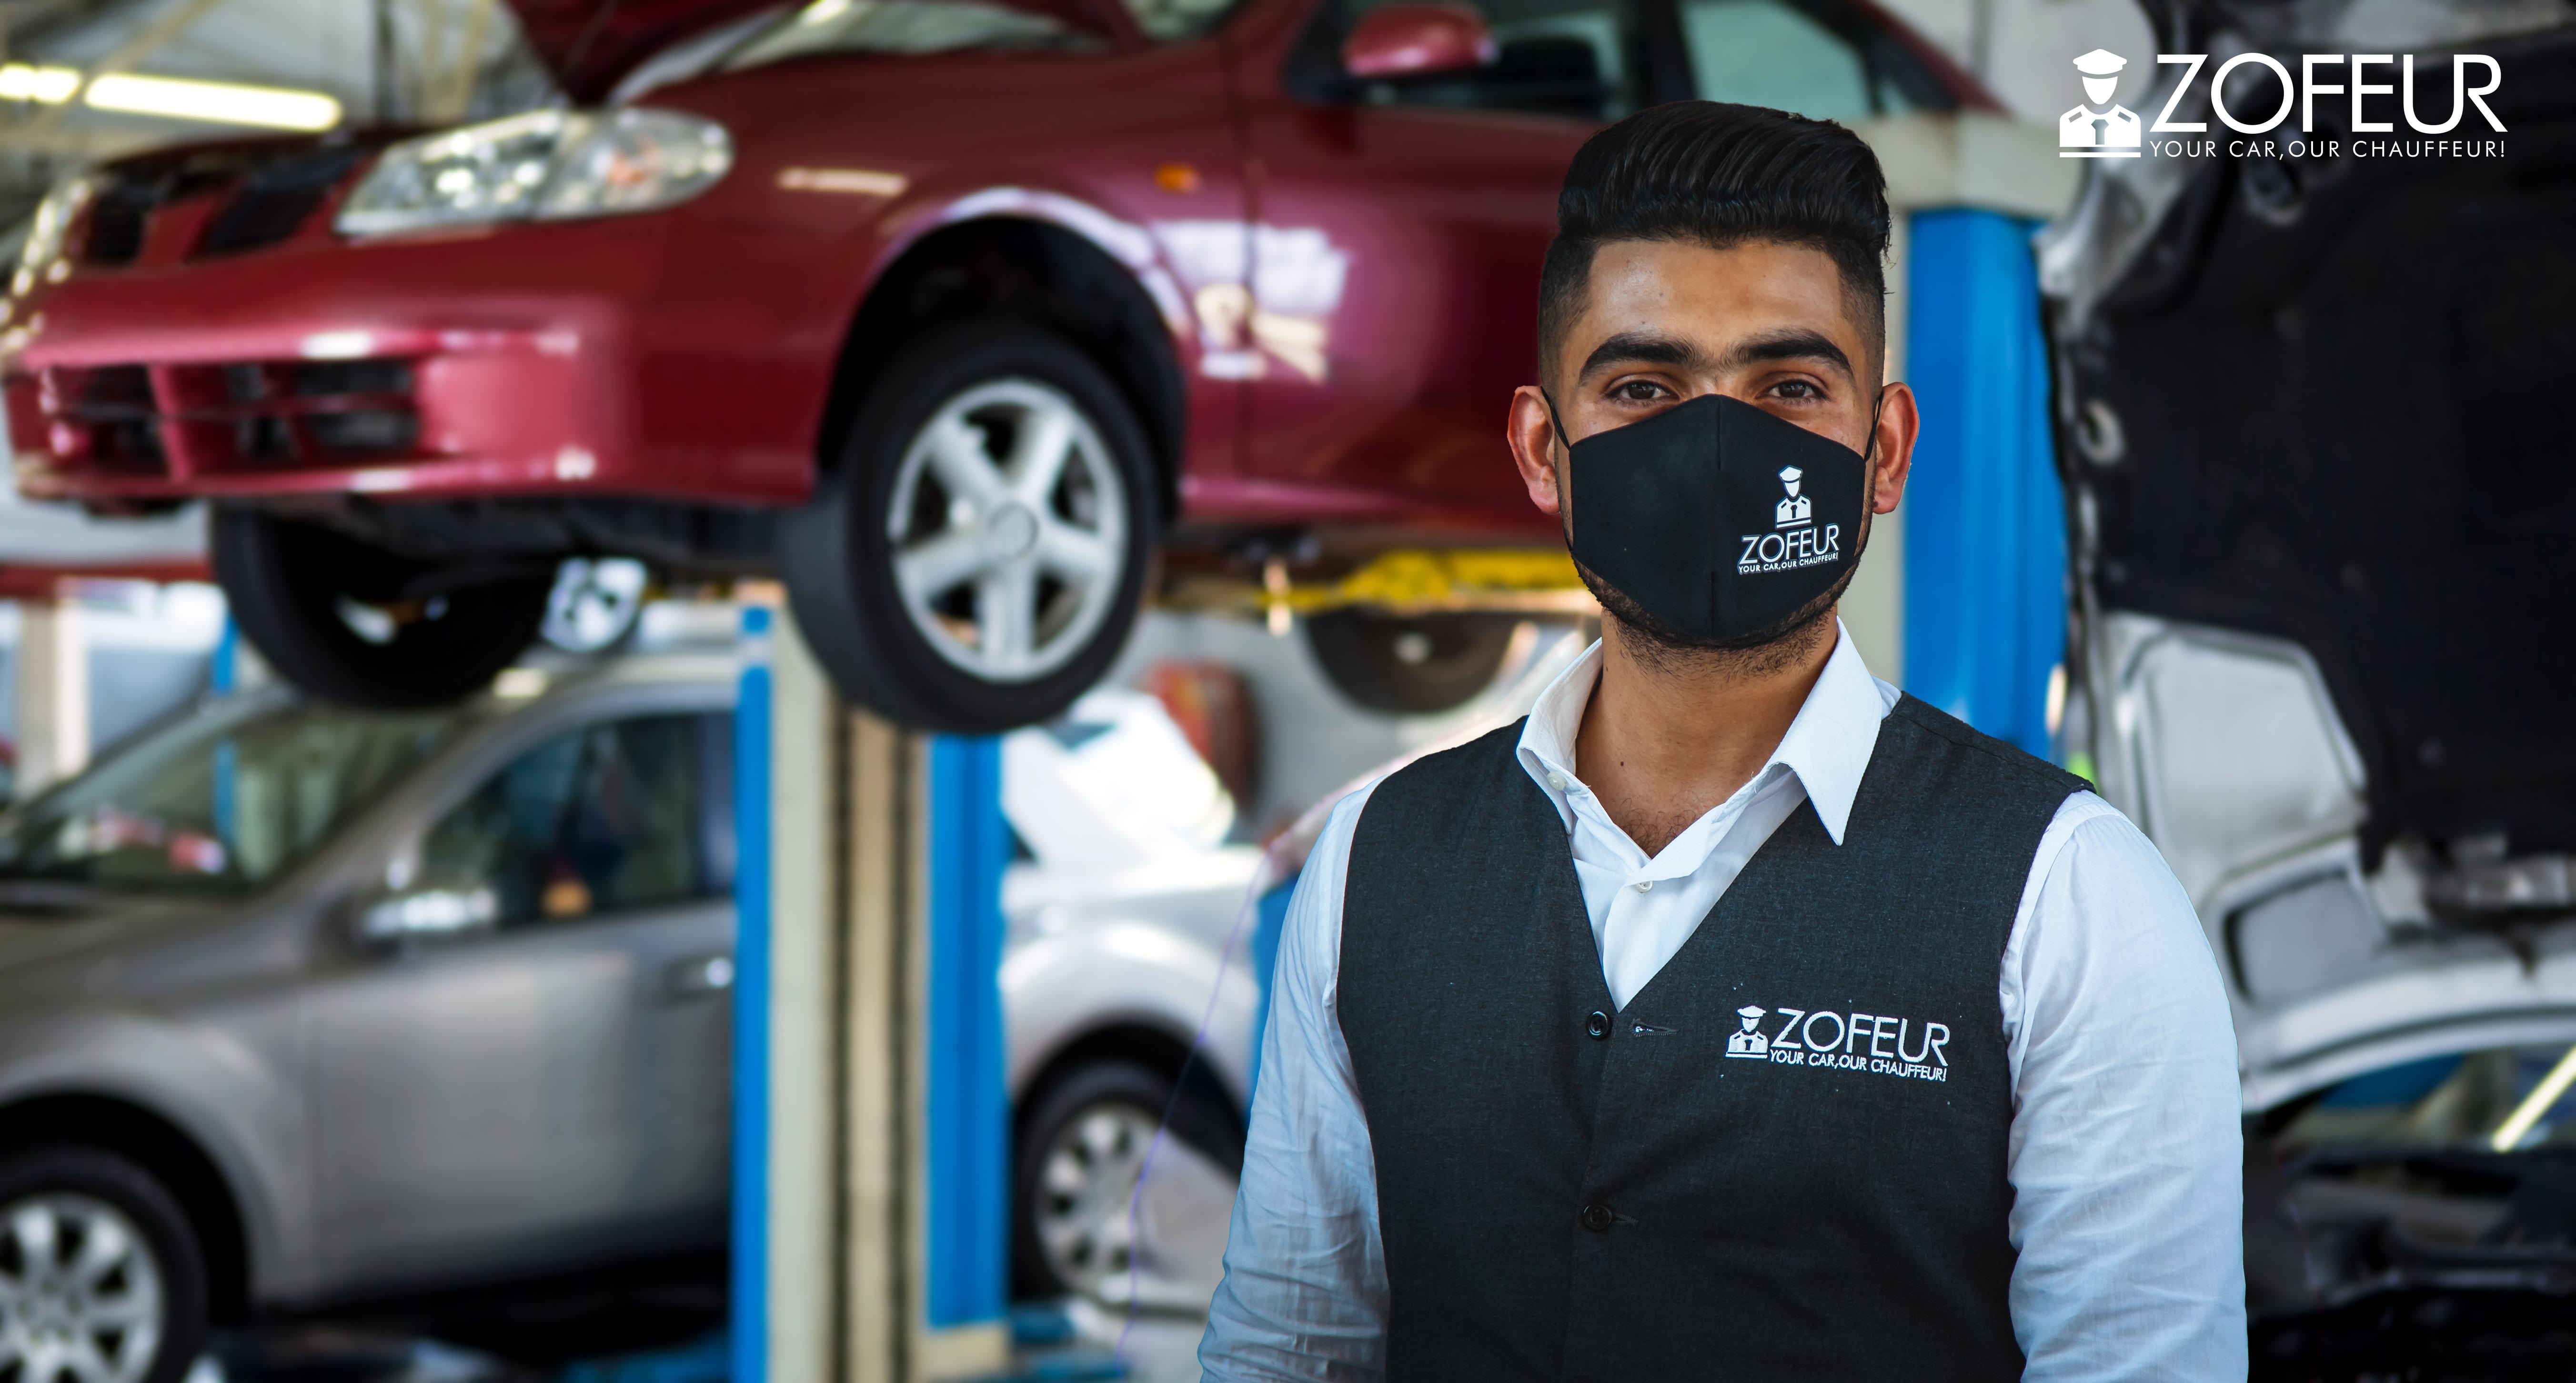 Zofeur: For just AED 49, drop your car at your favourite service station.